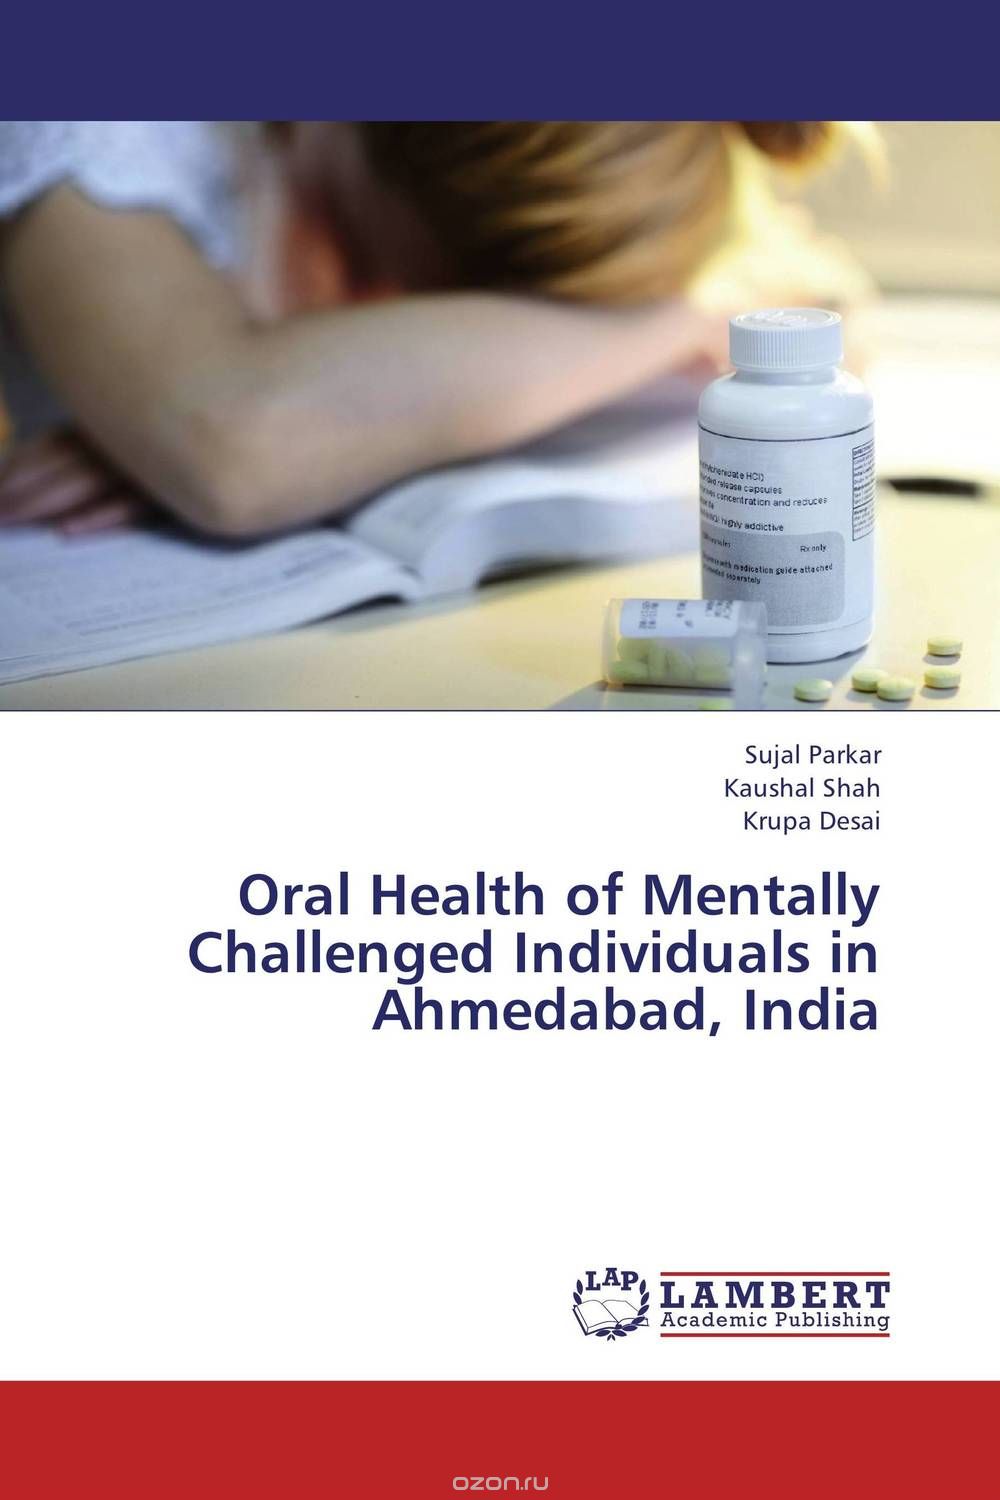 Скачать книгу "Oral Health of Mentally Challenged Individuals in Ahmedabad, India"